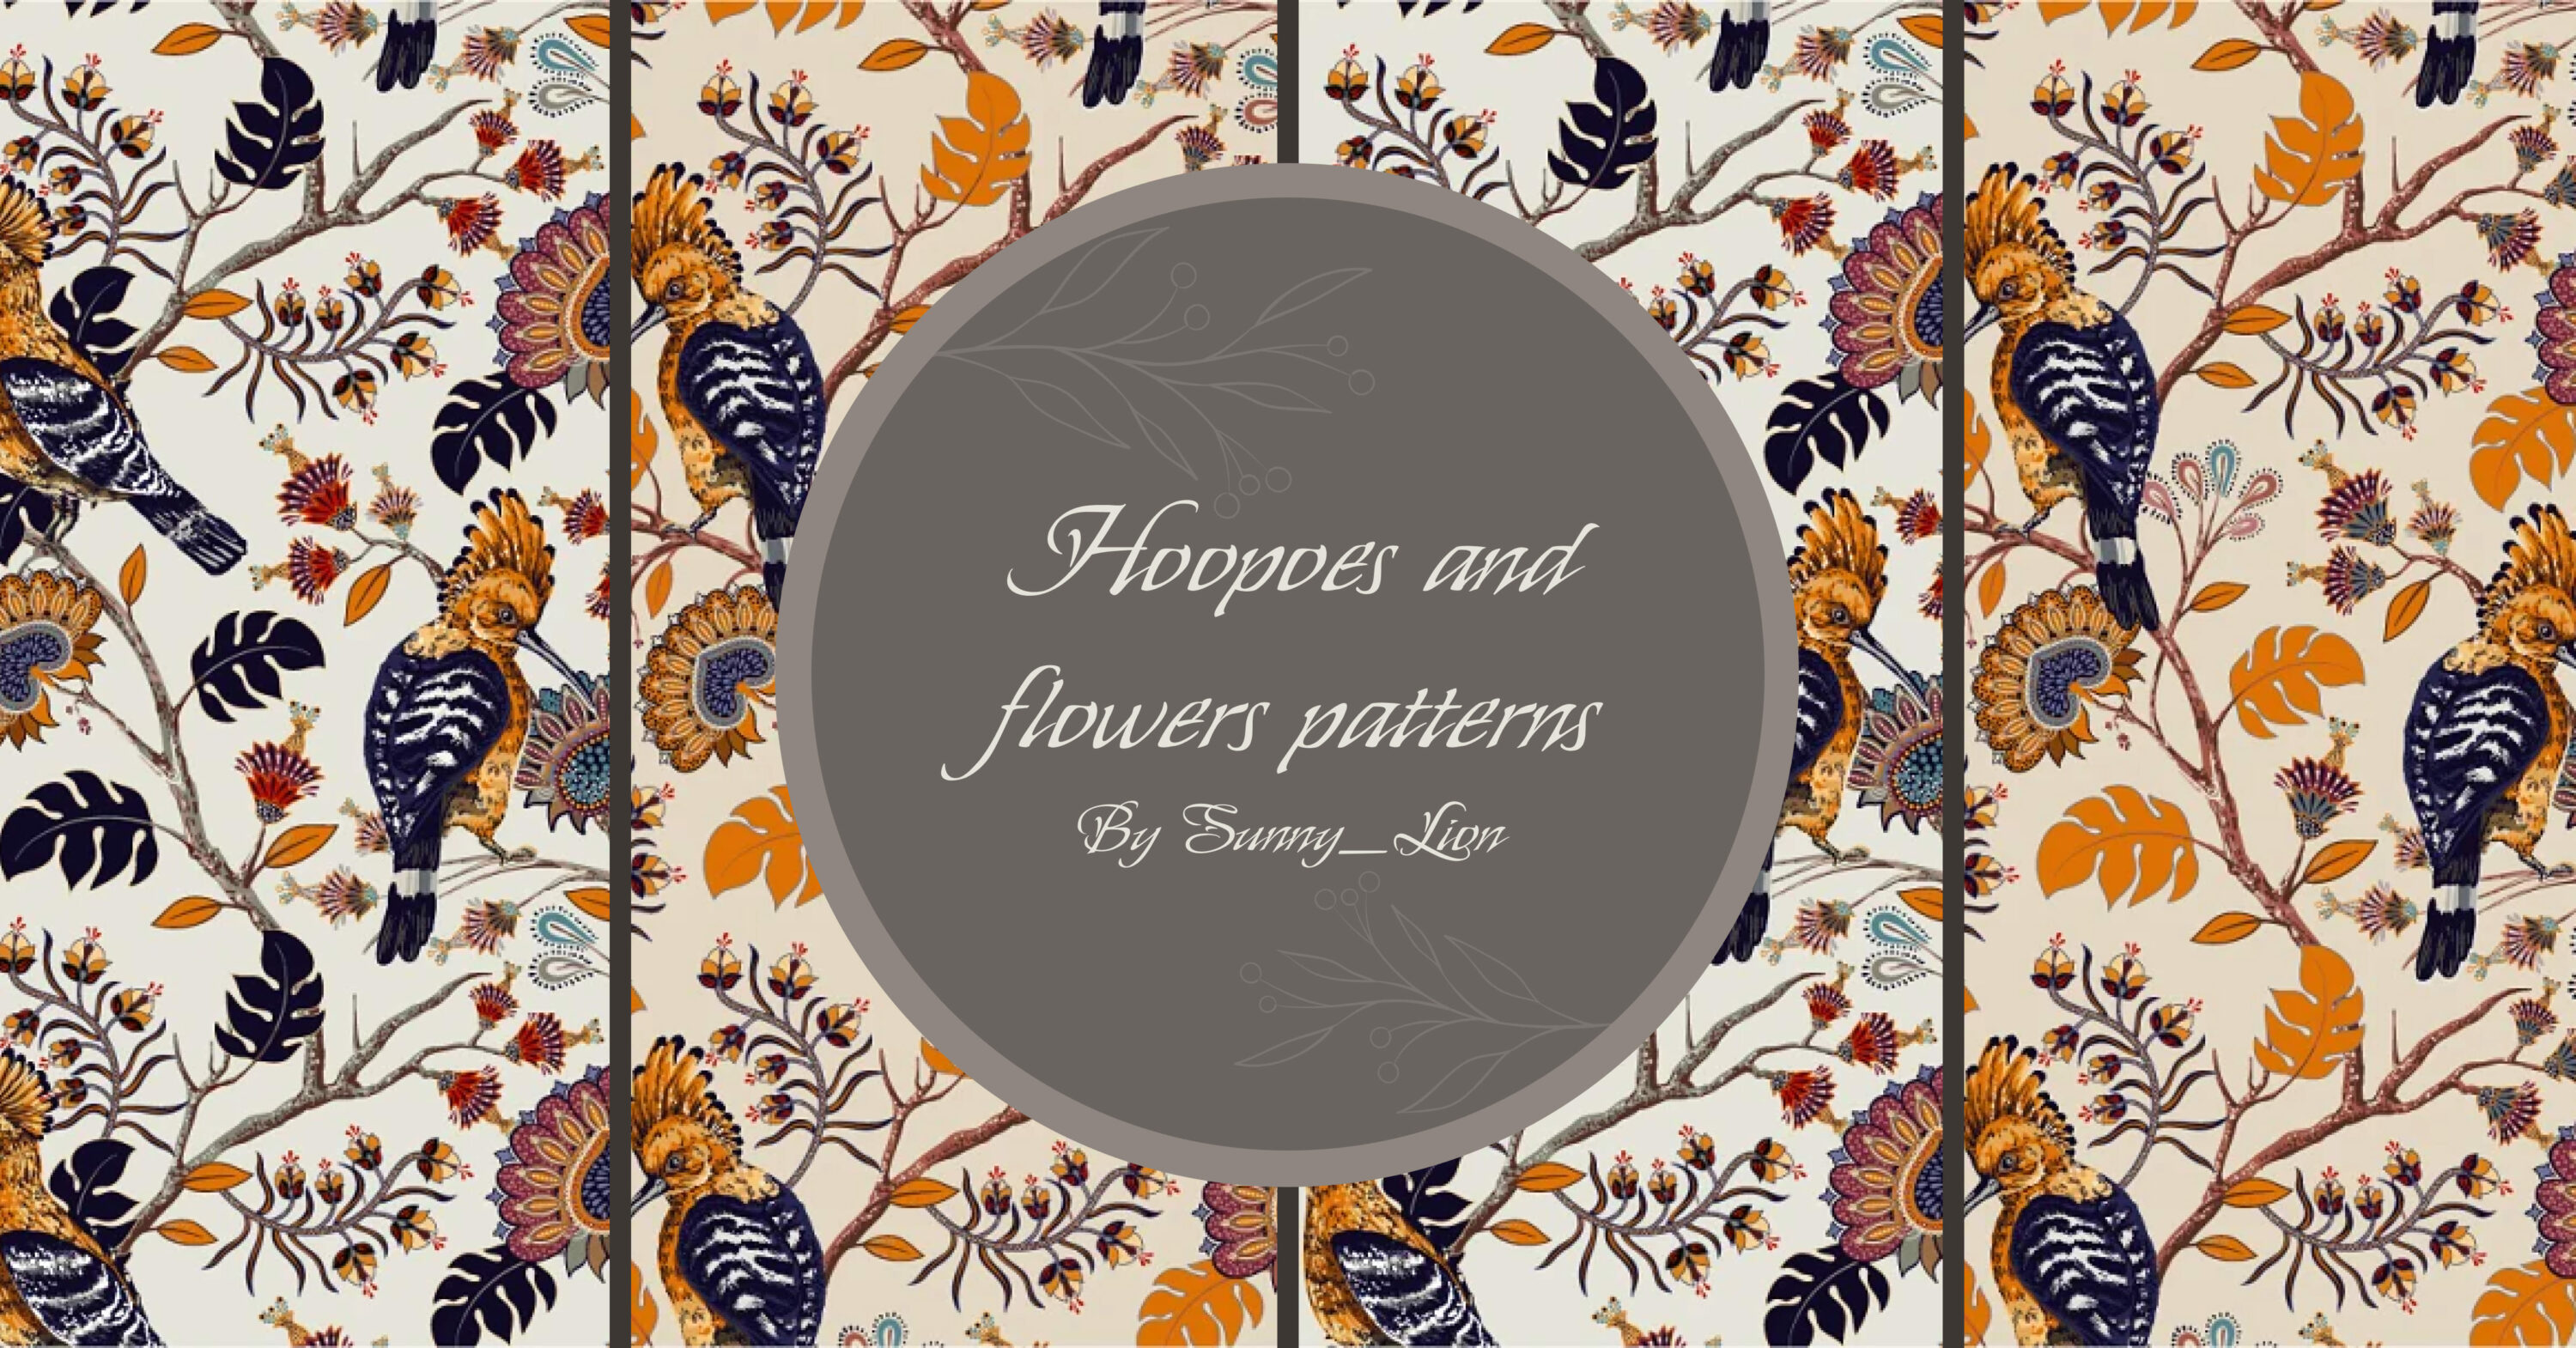 Hoopoes and Flowers Patterns facebook image.